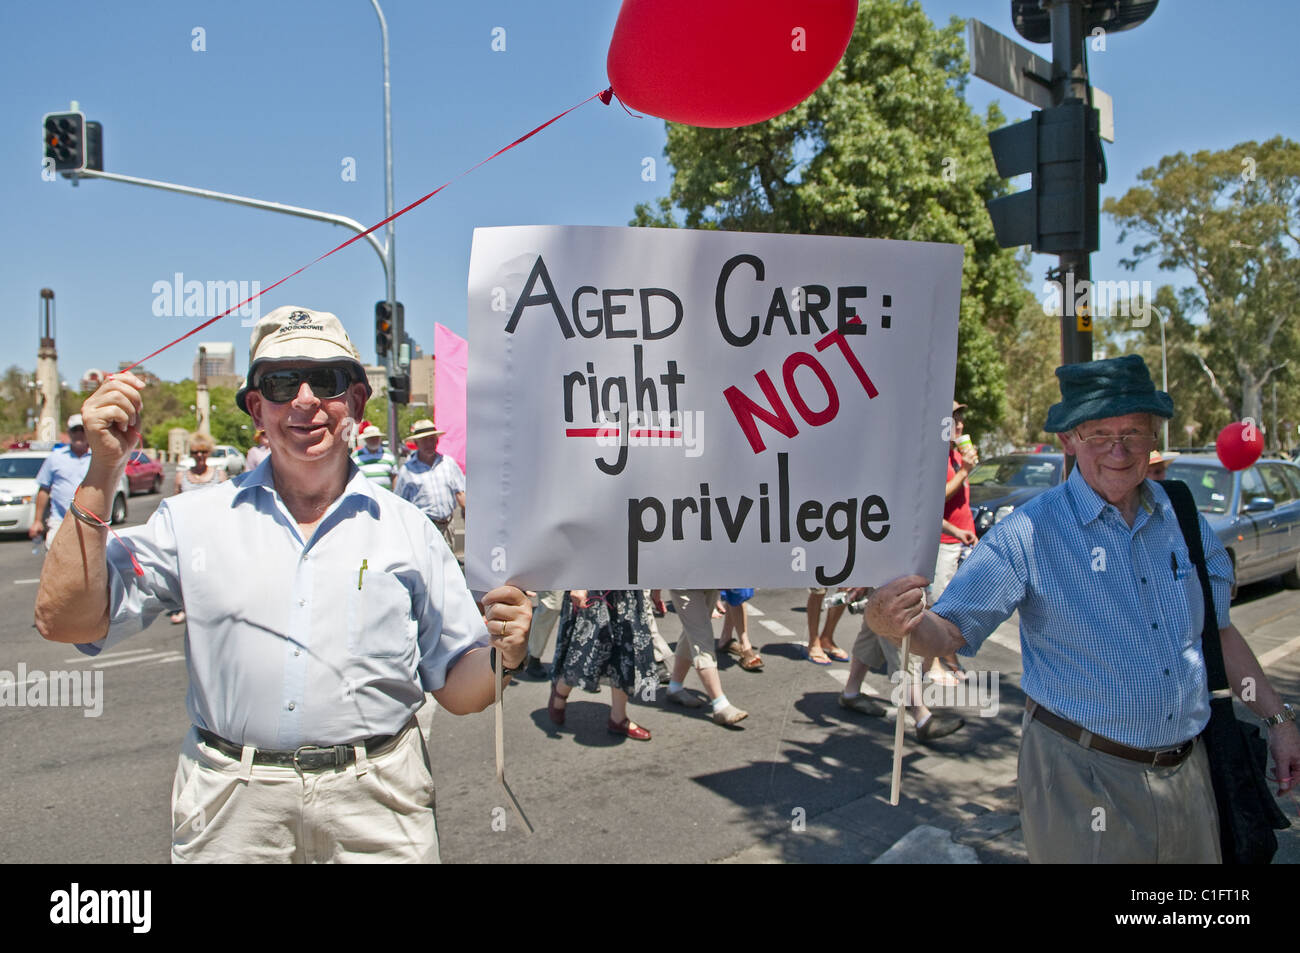 Rights for Aged Care March through the streets of Adelaide, South Australia Stock Photo